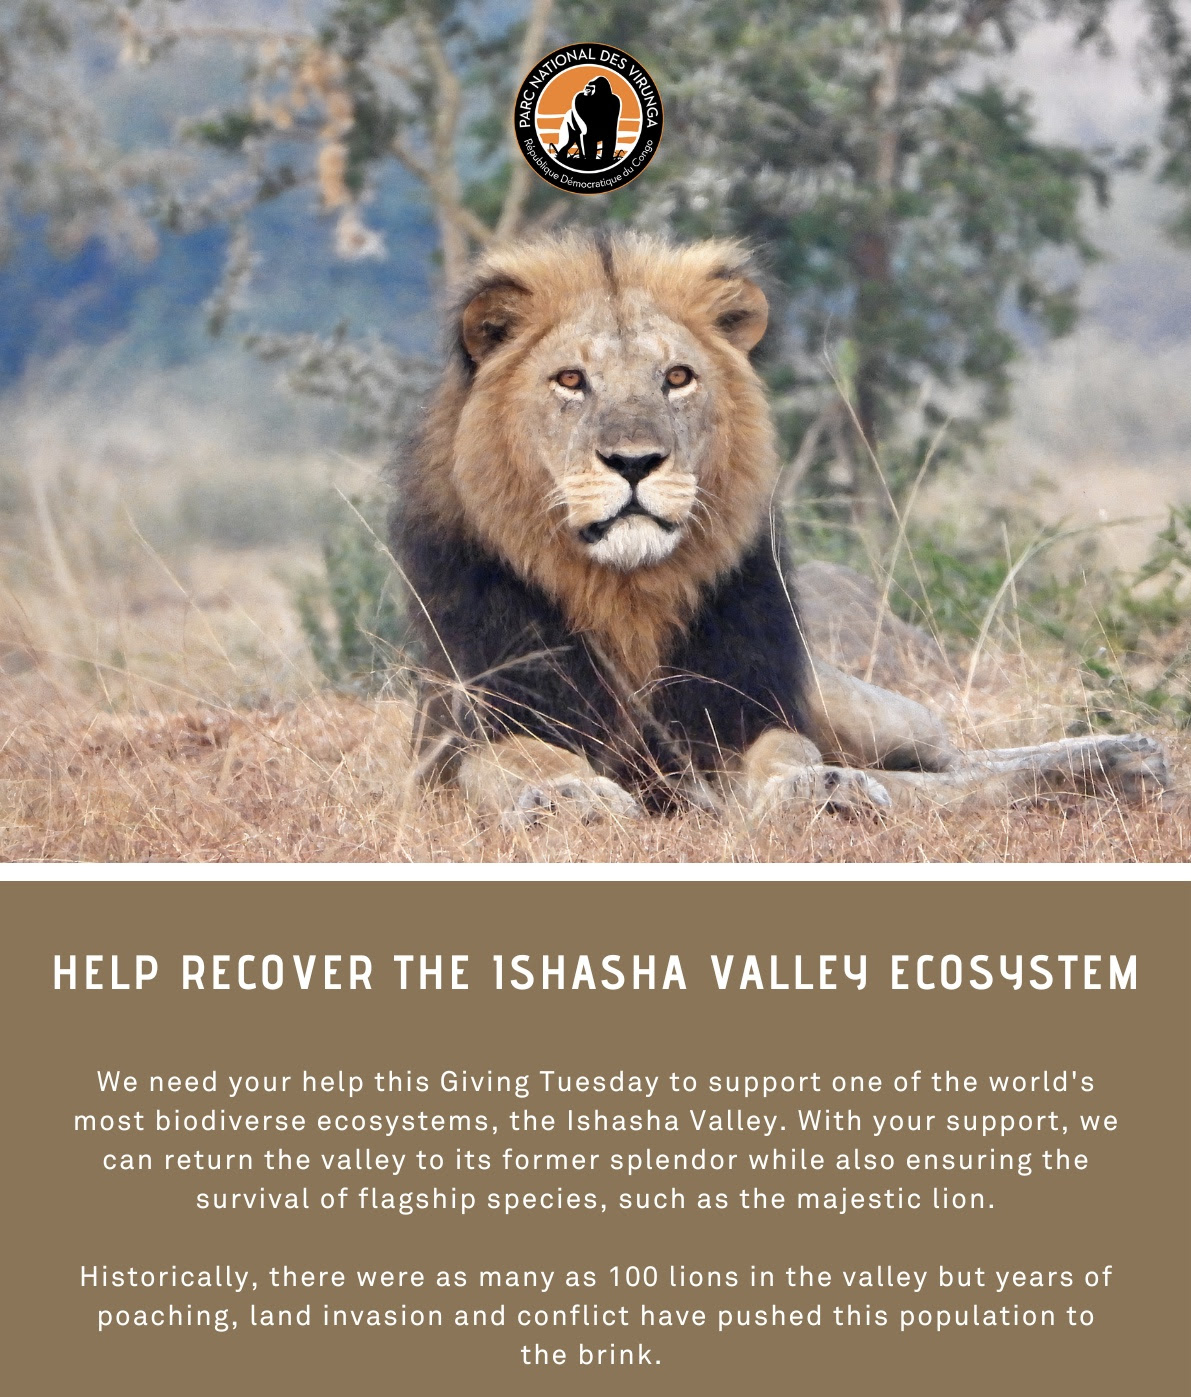 We need your help this Giving Tuesday to support one of the world's most biodiverse ecosystems, the Ishasha Valley. With your support, we can return the valley to its former splendor while also ensuring the survival of flagship species, such as the majestic lion.